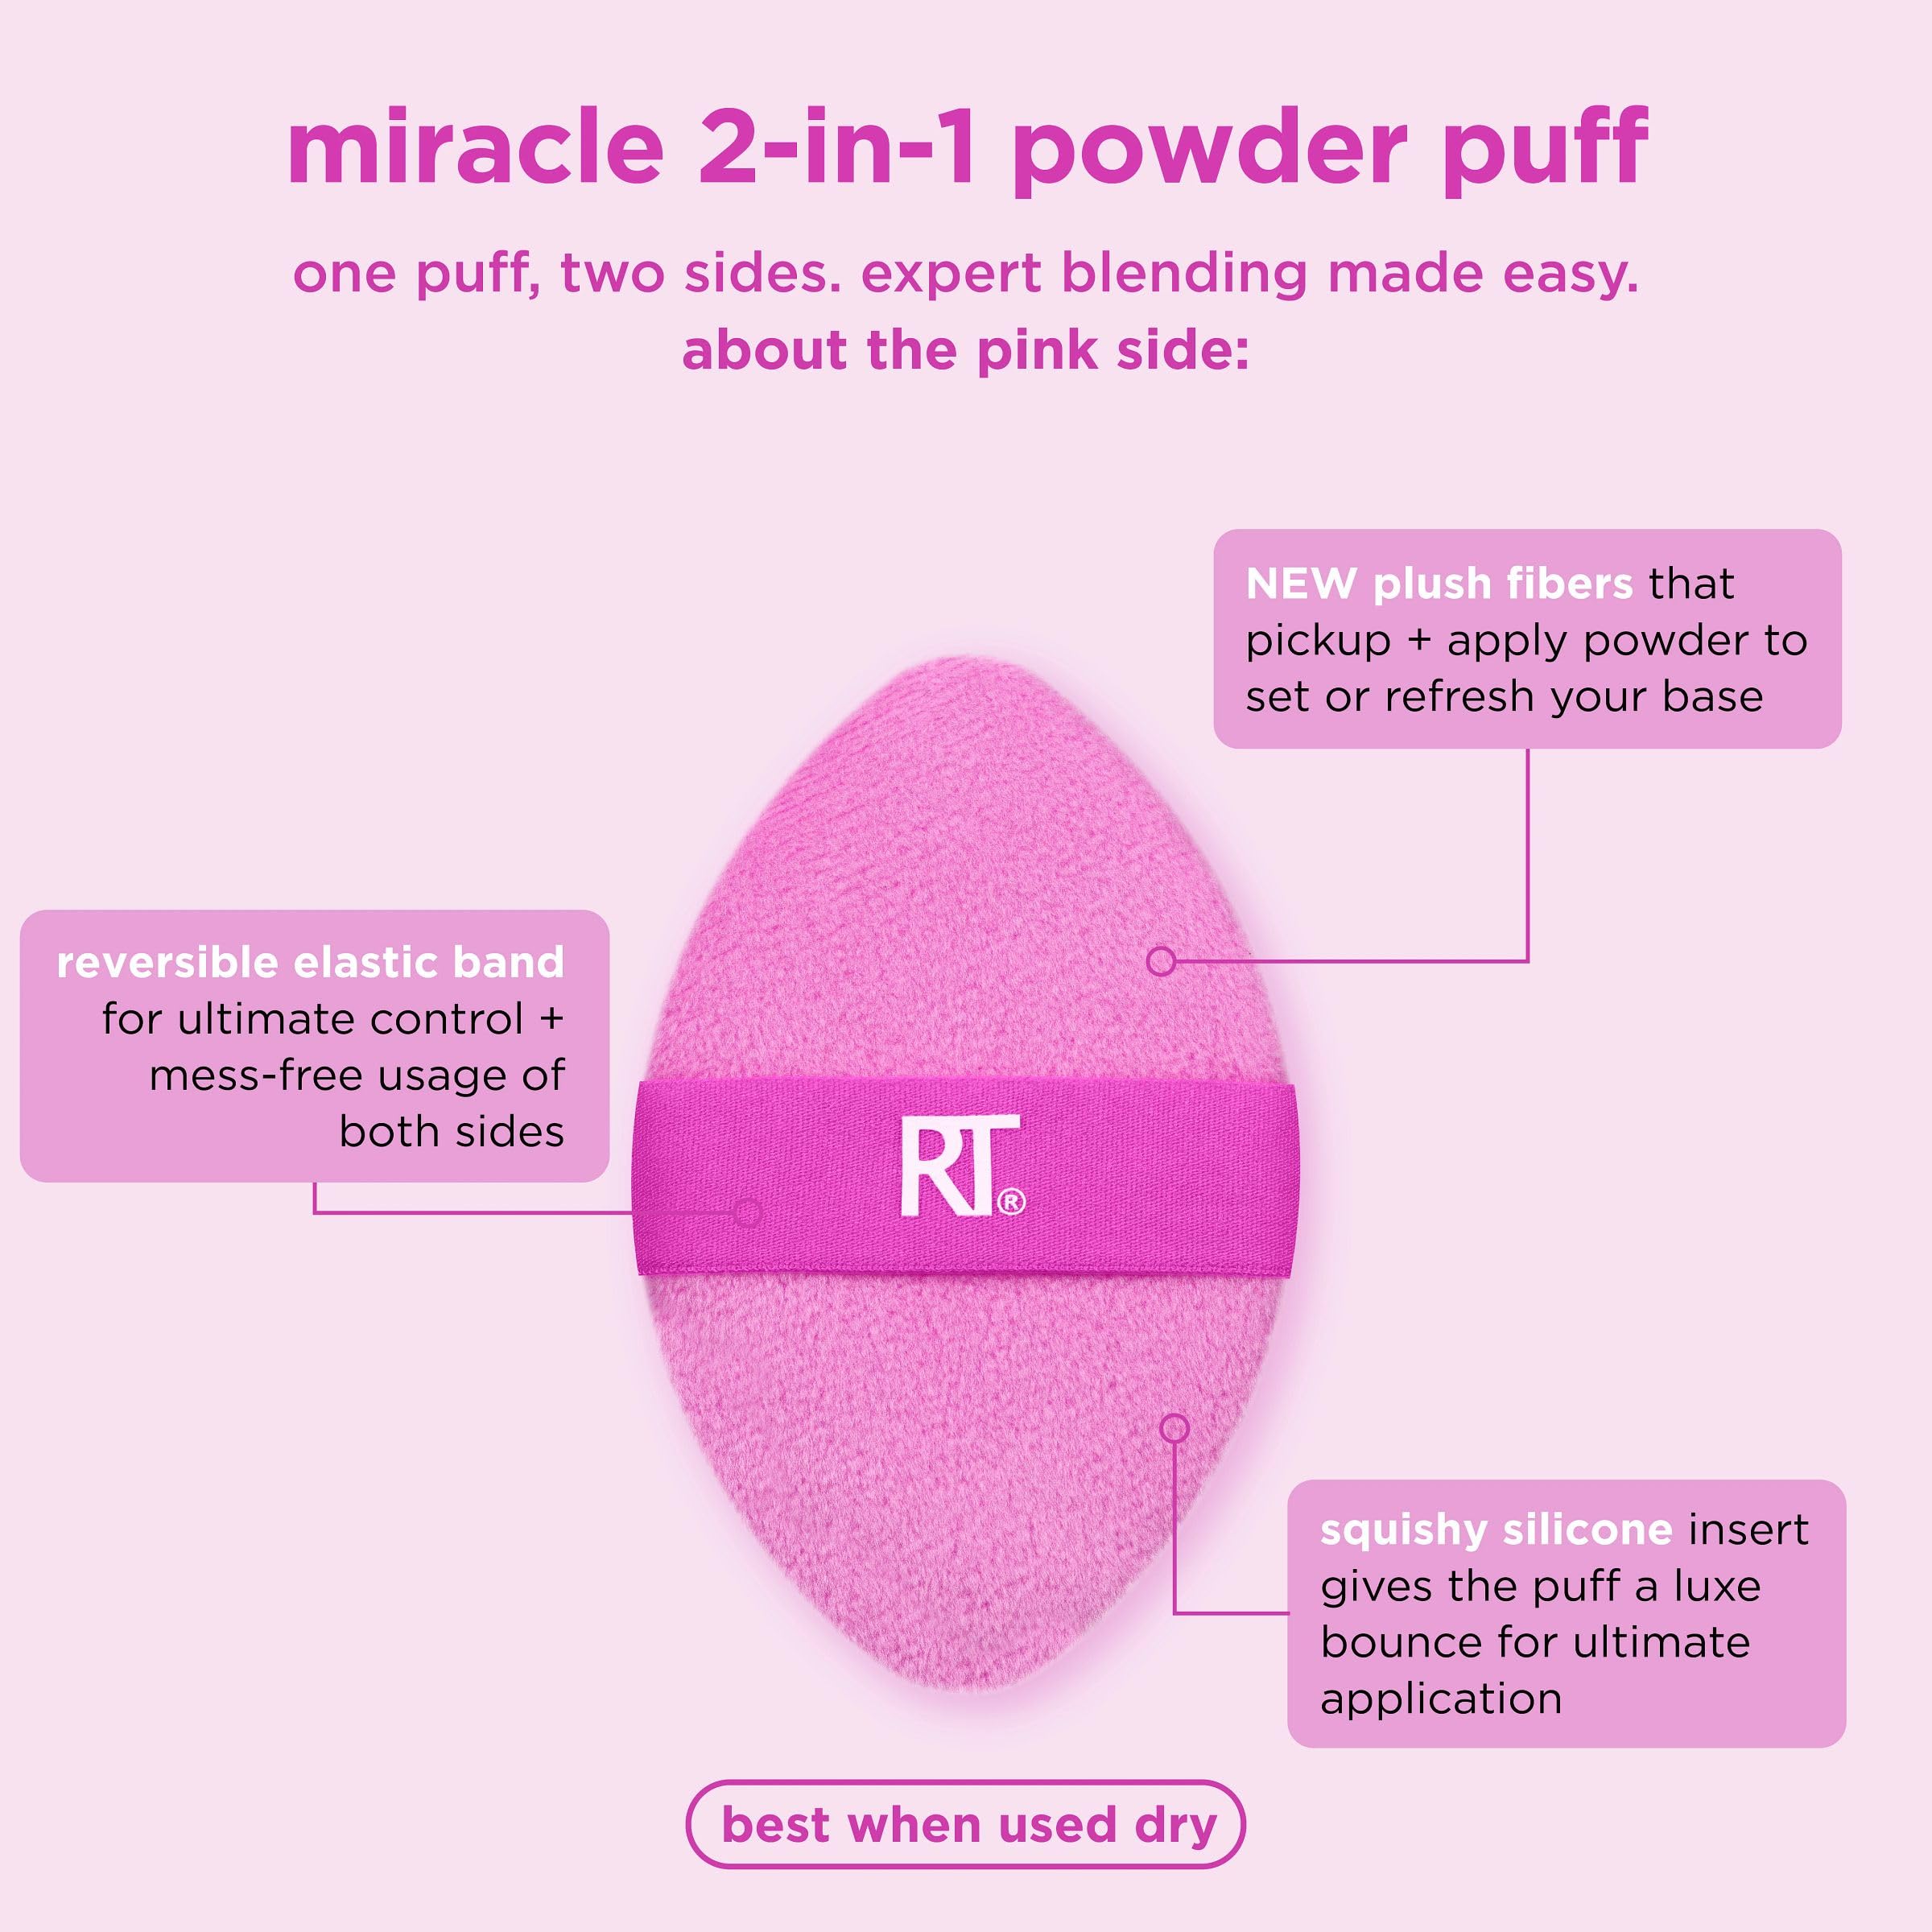 Real Techniques Miracle 2-In-1 Powder Puff, Dual-Sided, Full-Size Makeup Blending Puff, Reversible Elastic Band, Precision Tip Makeup Sponge & Powder Puff, For Liquid, Cream & Powder, 2 Count